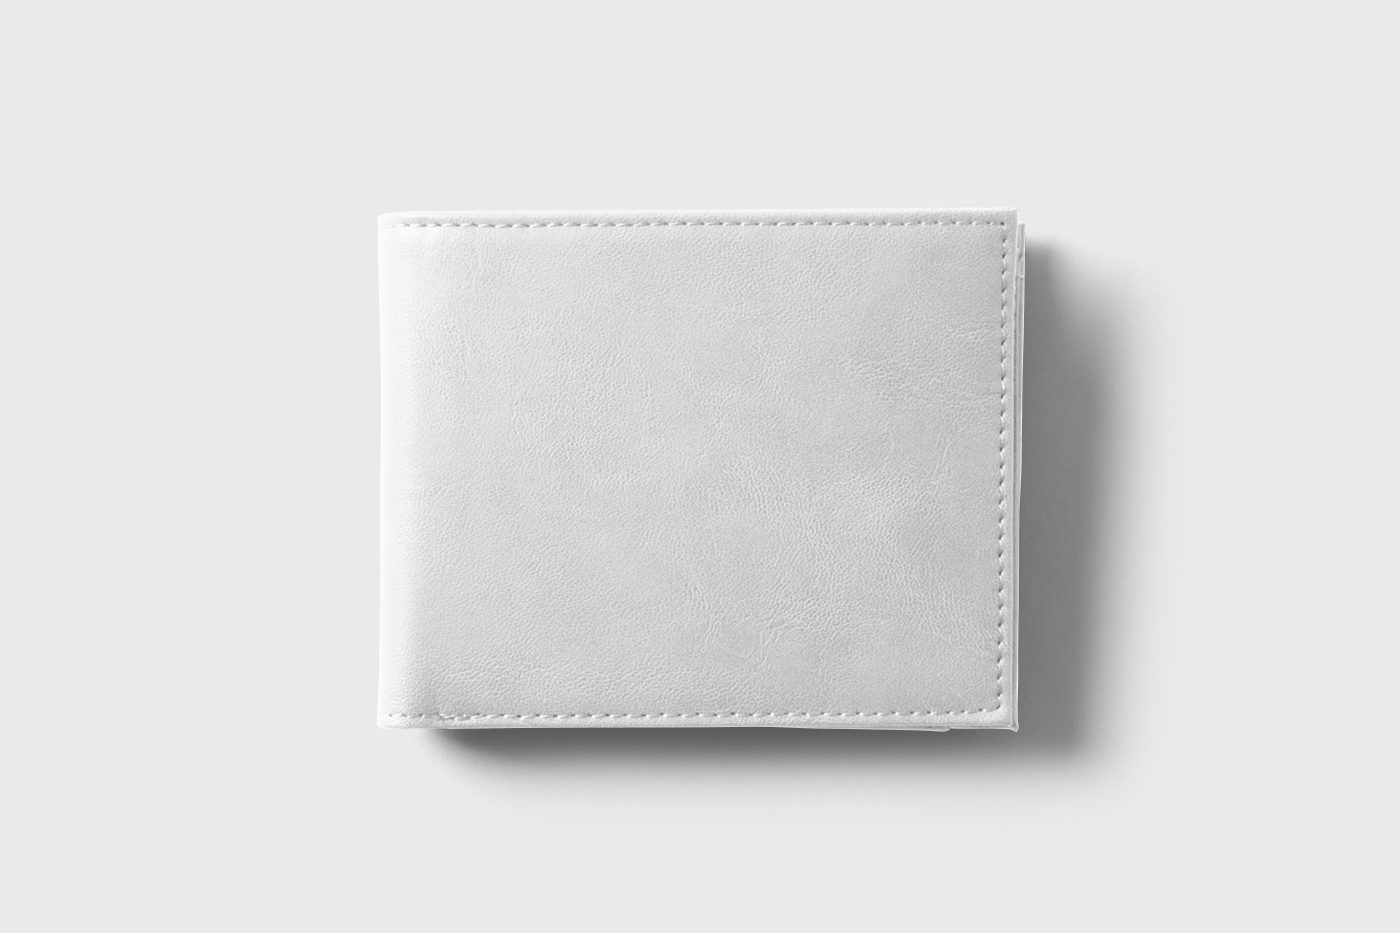 Top View of Minimal Leather Wallet Mockup FREE PSD